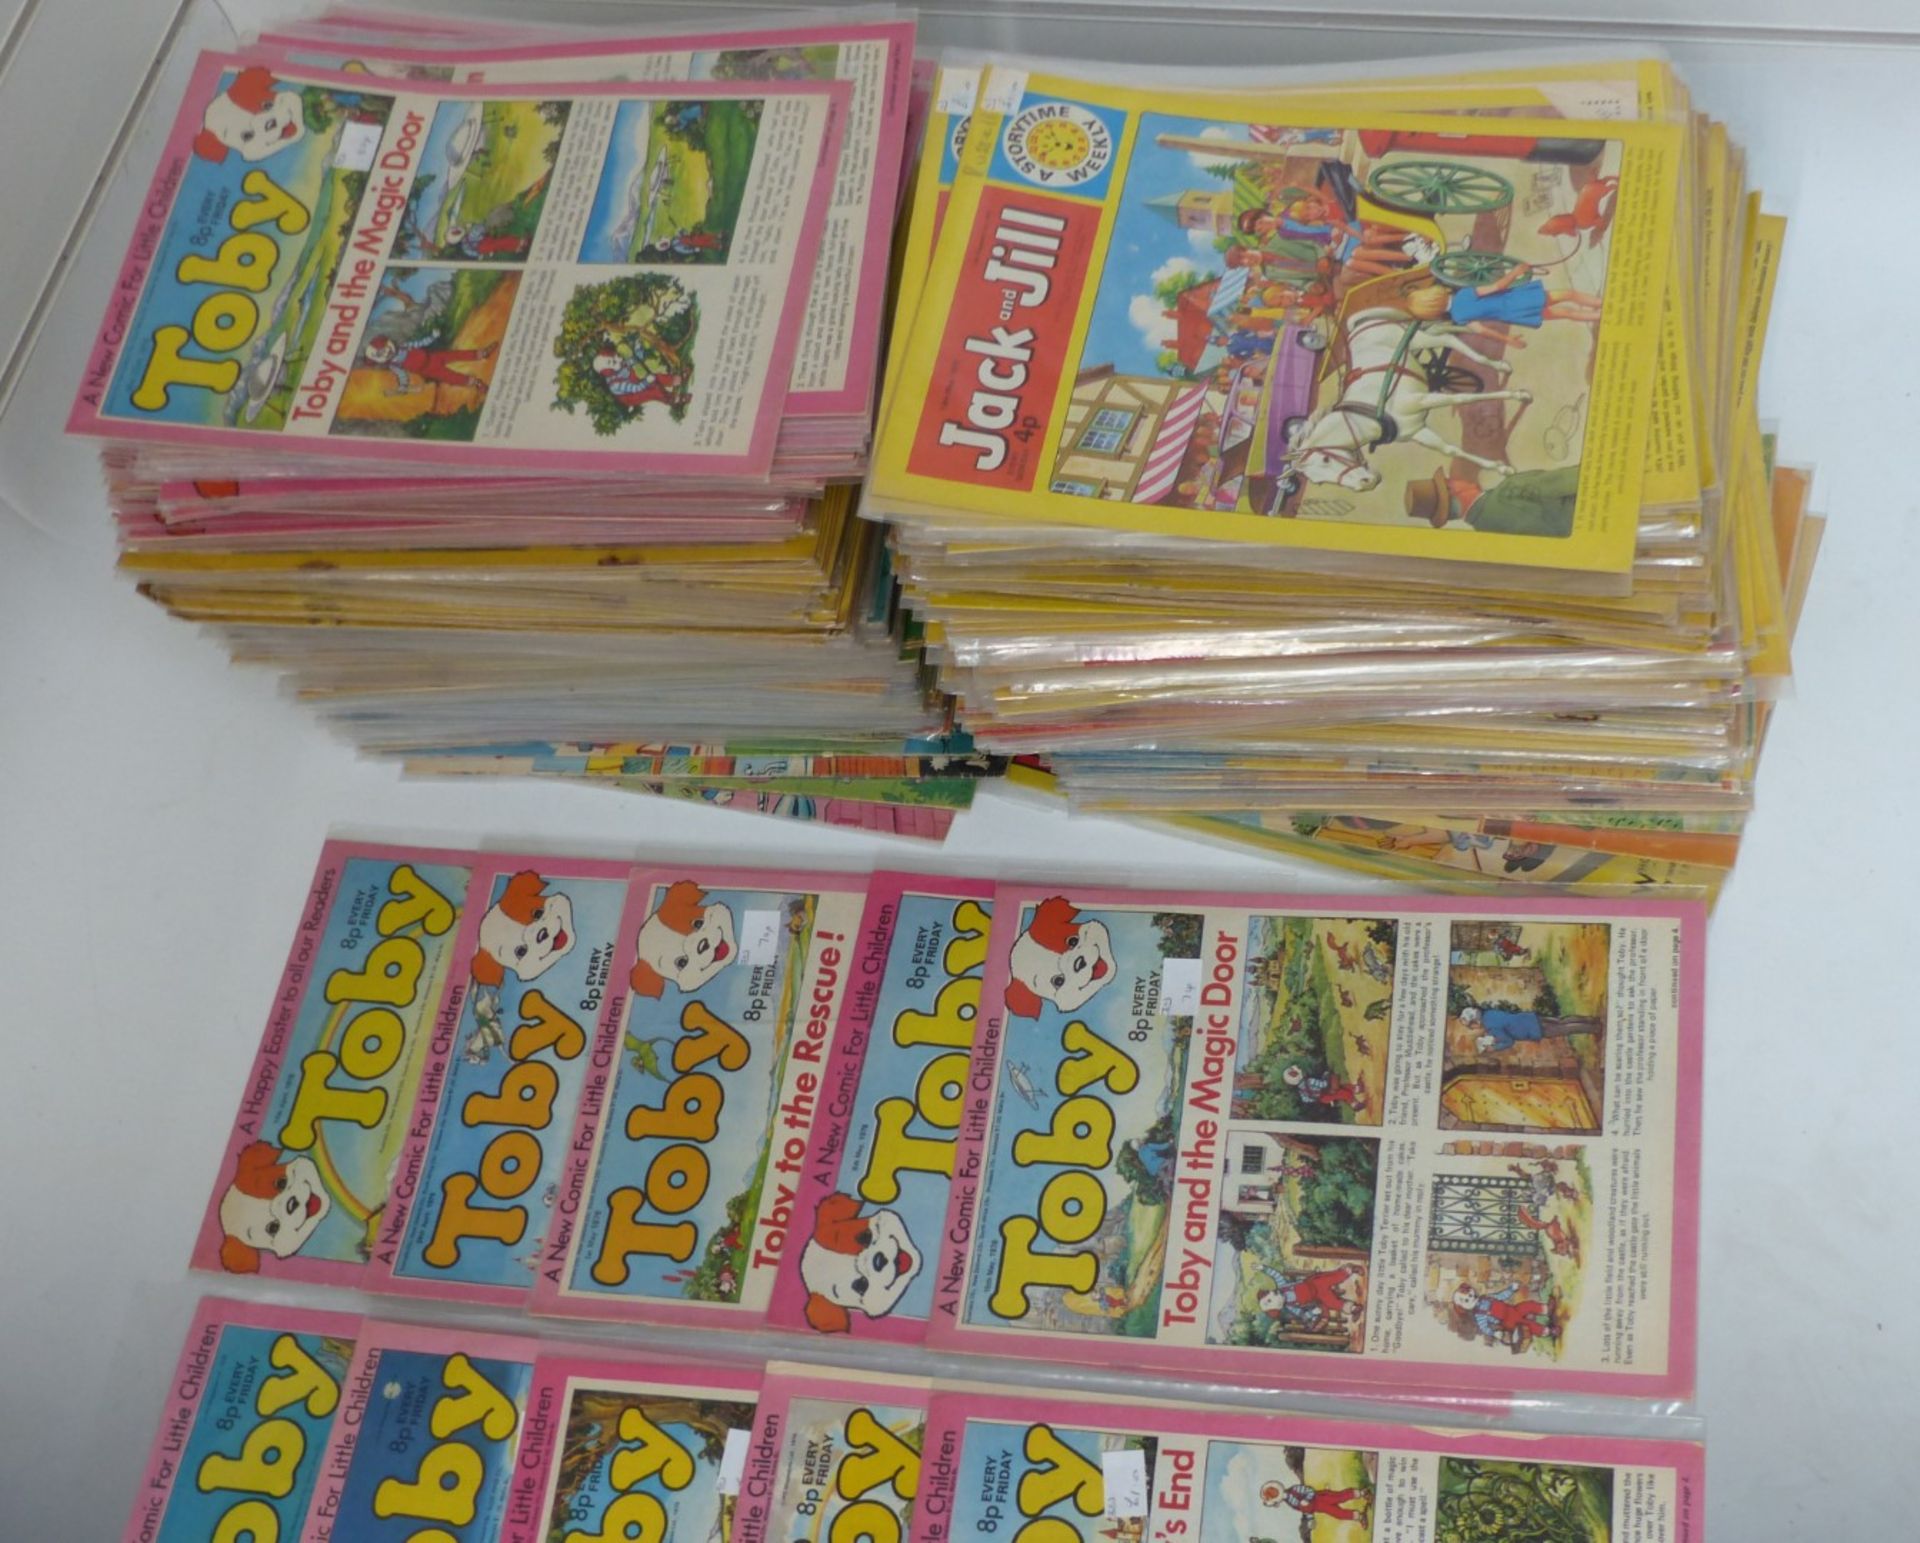 Over 400 children's comics including Little Star, Playhour, Jack and Jill, Bimbo, Storytime, - Image 5 of 5